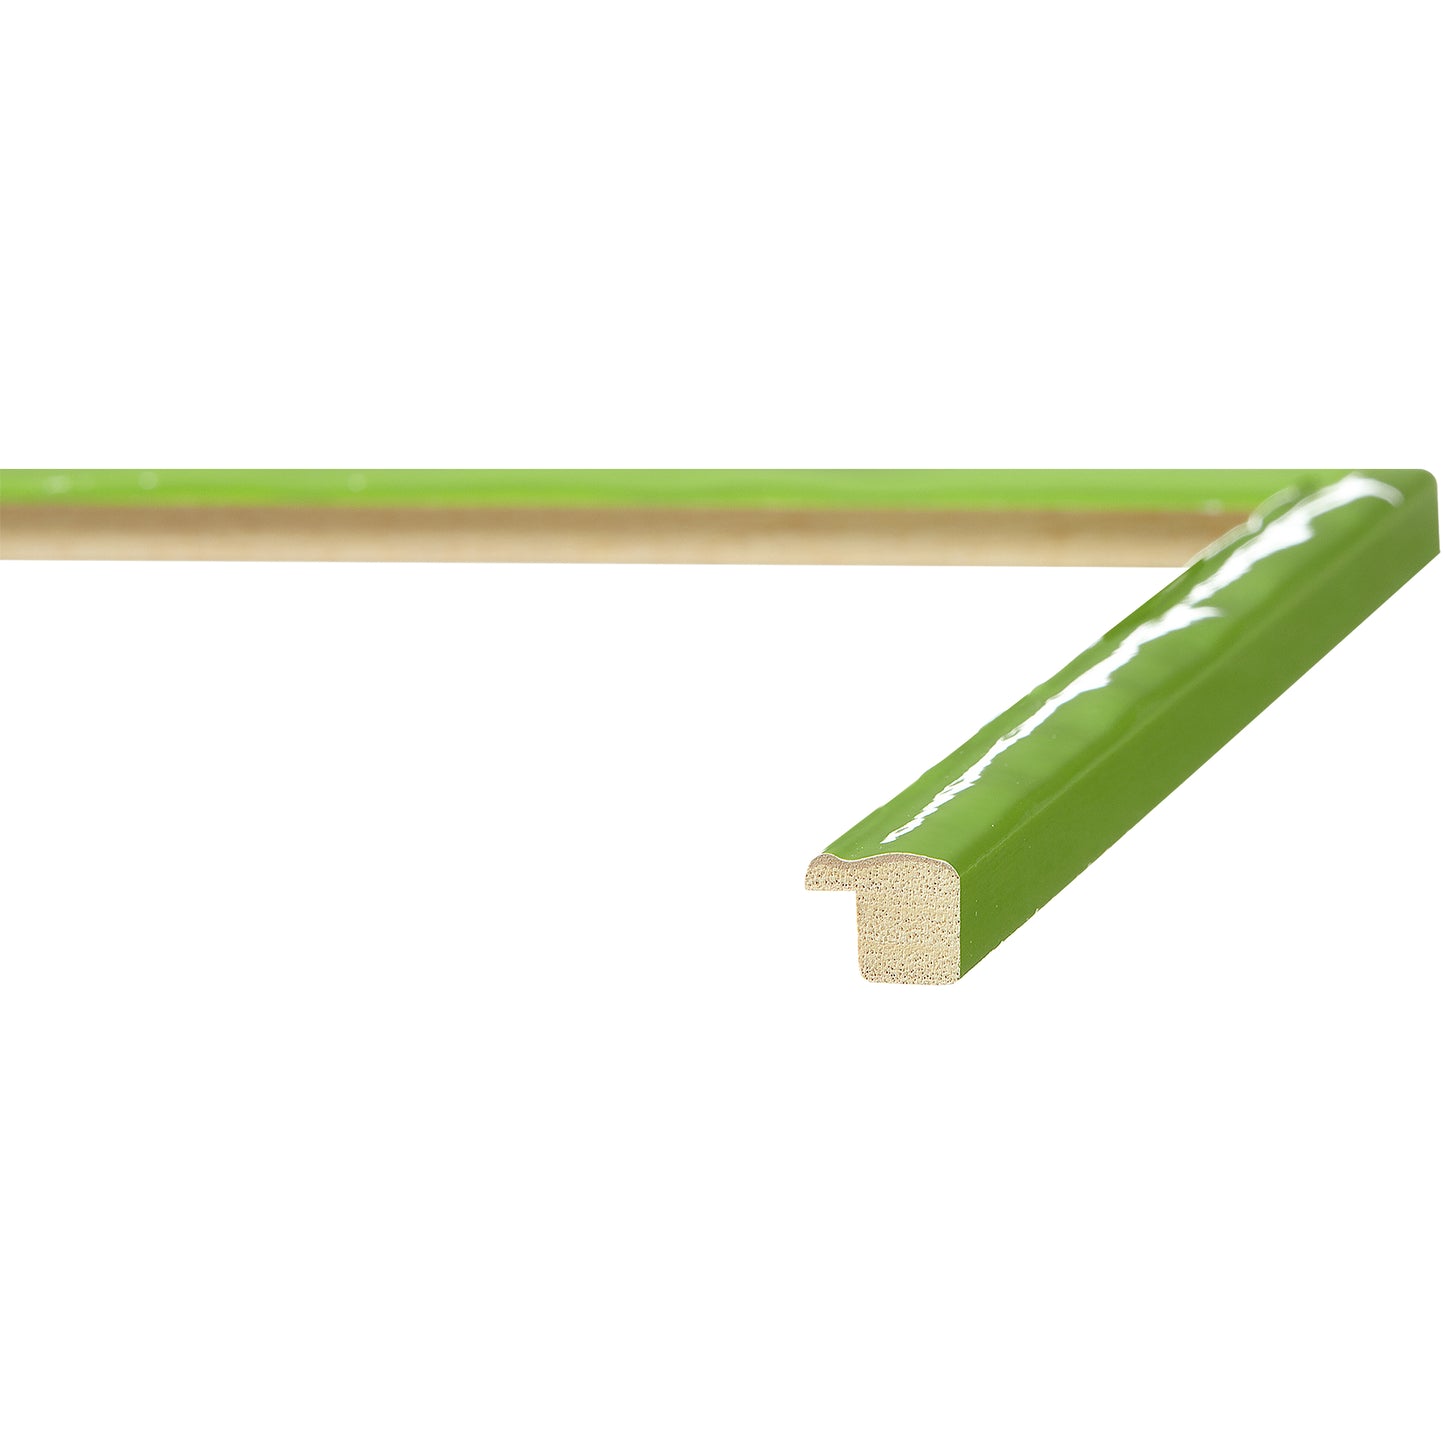 Shimmering Green Narrow Width Table Top Frame